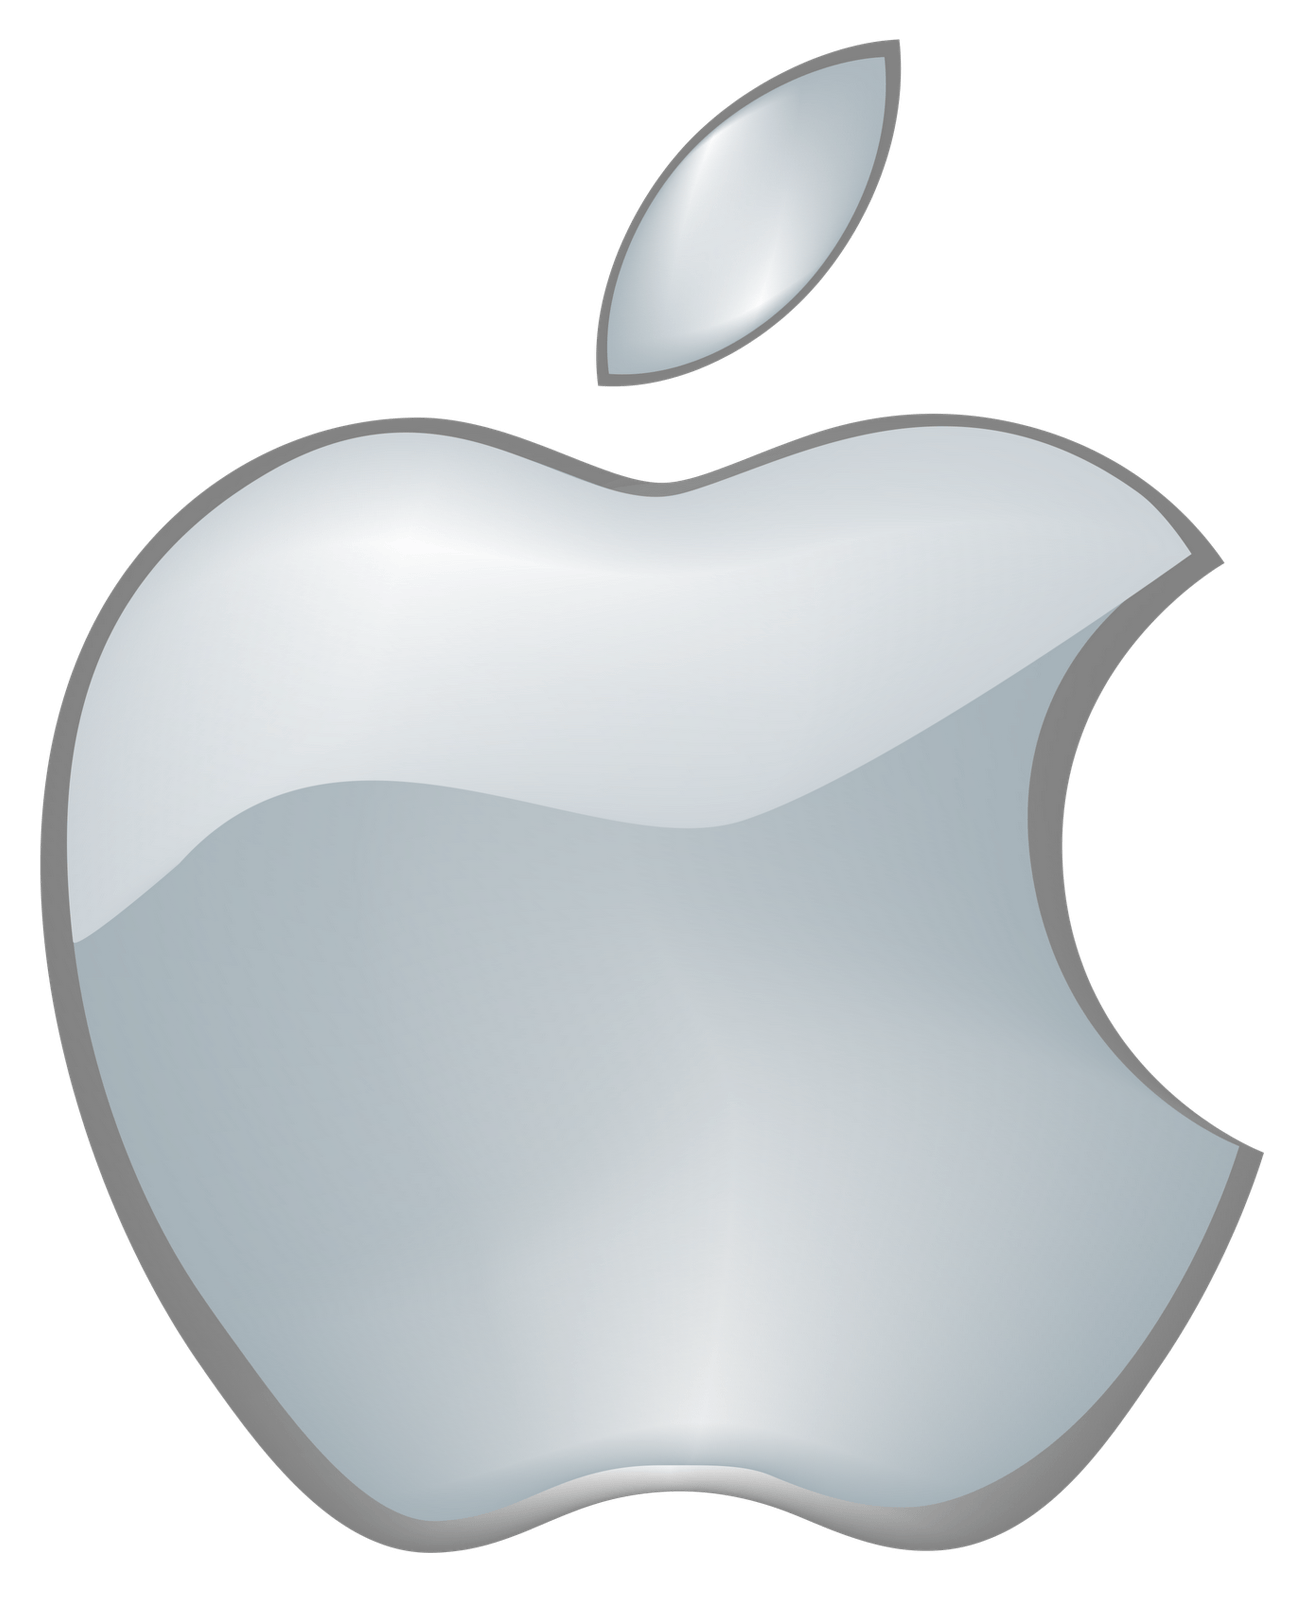 B in Apple Logo - HITS Daily Double : Rumor Mill - BIG APPLE: VALUE HITS $800B